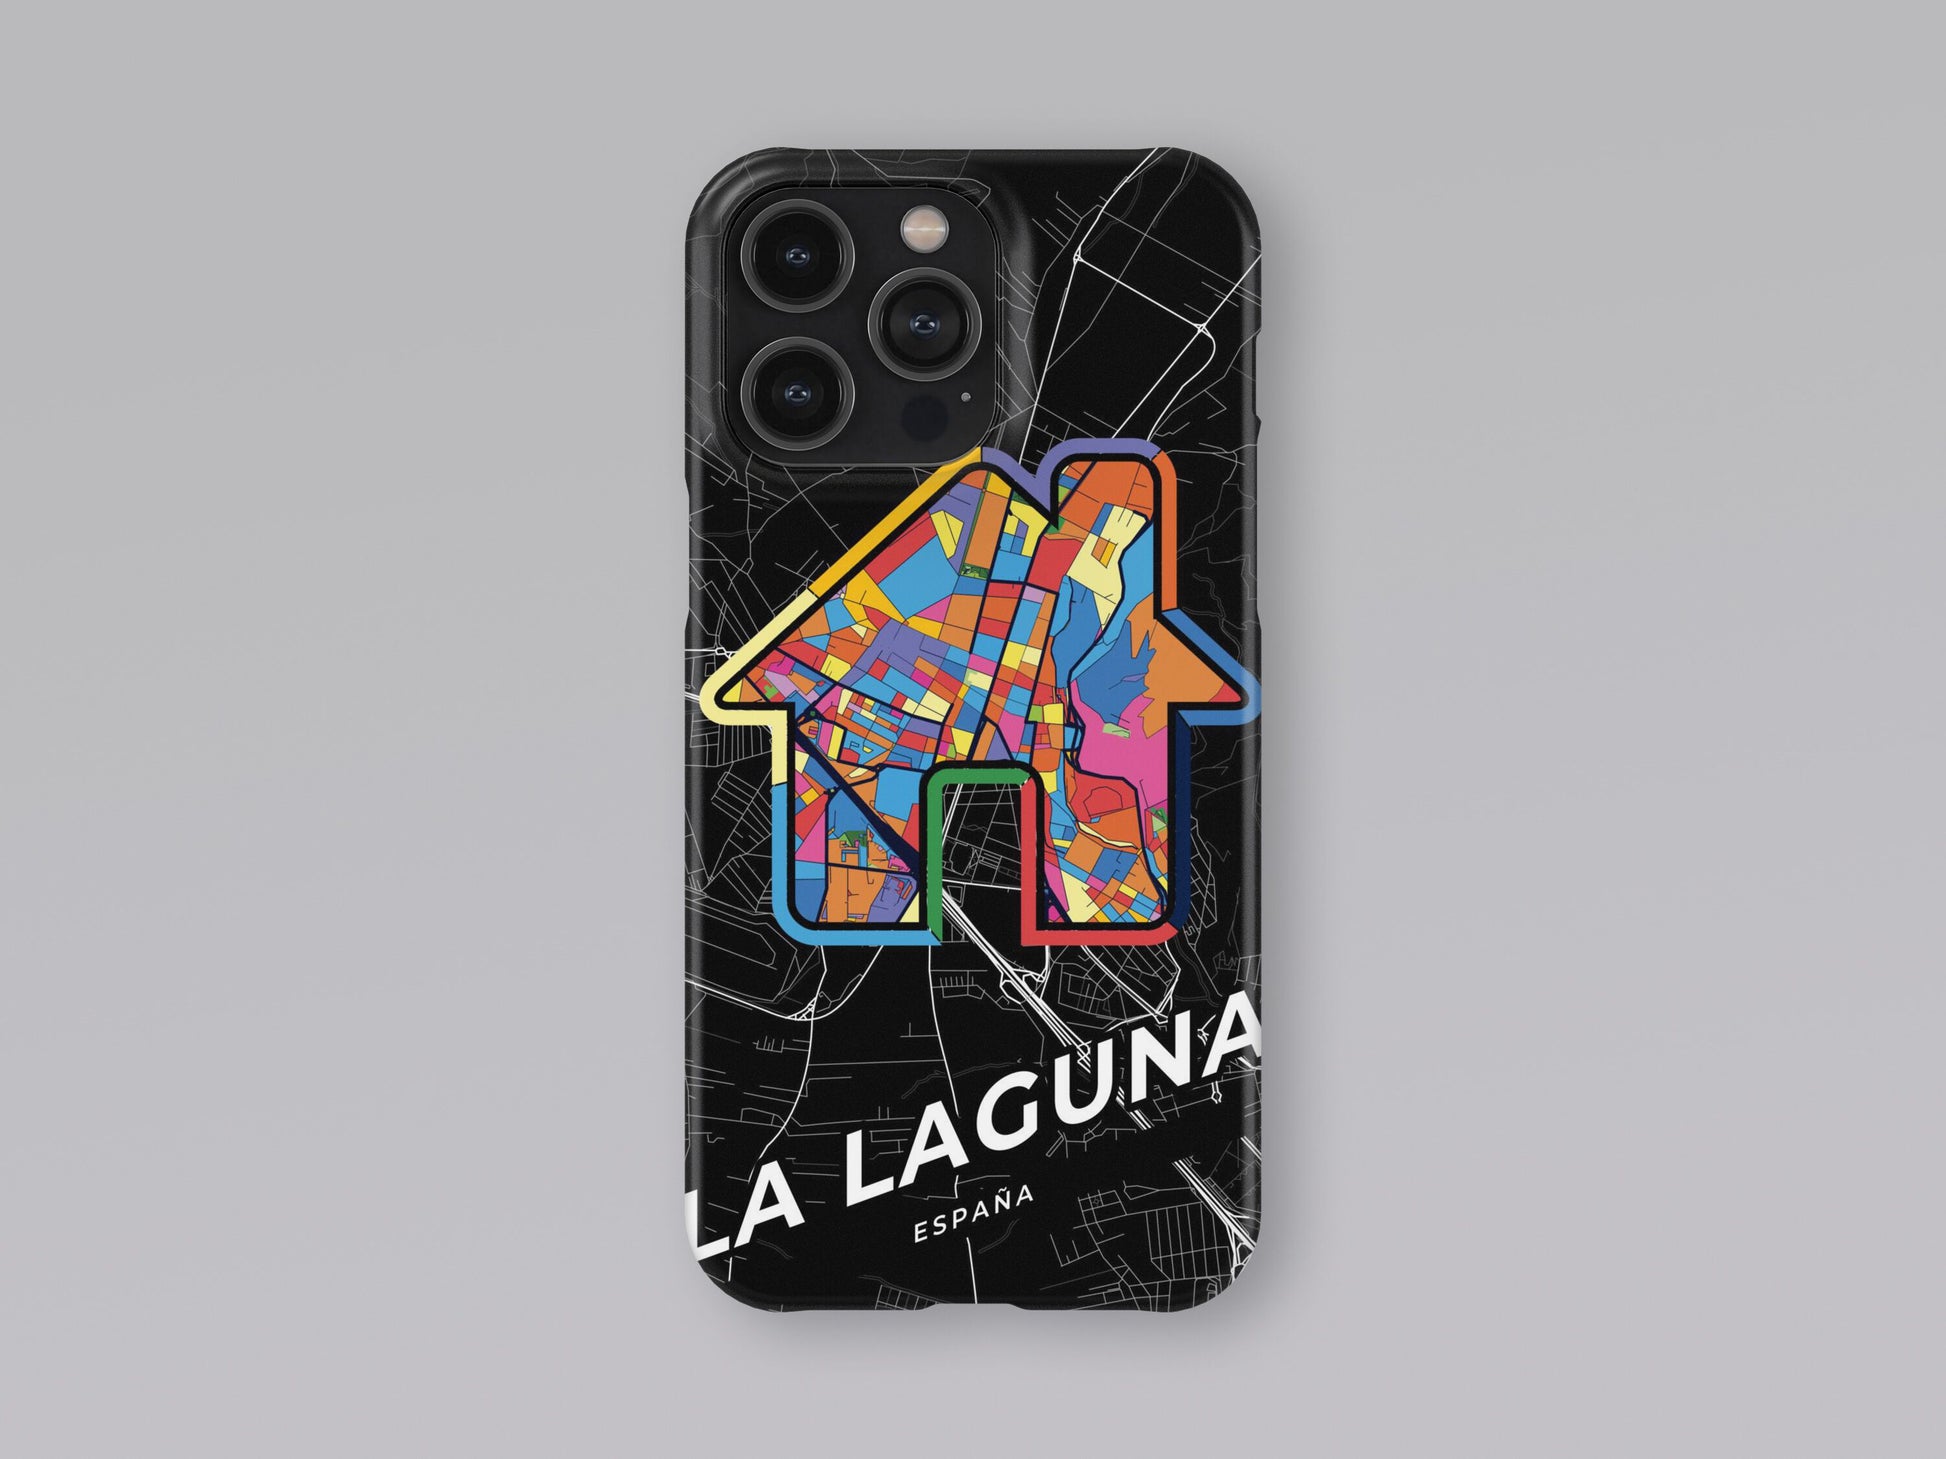 La Laguna Spain slim phone case with colorful icon. Birthday, wedding or housewarming gift. Couple match cases. 3